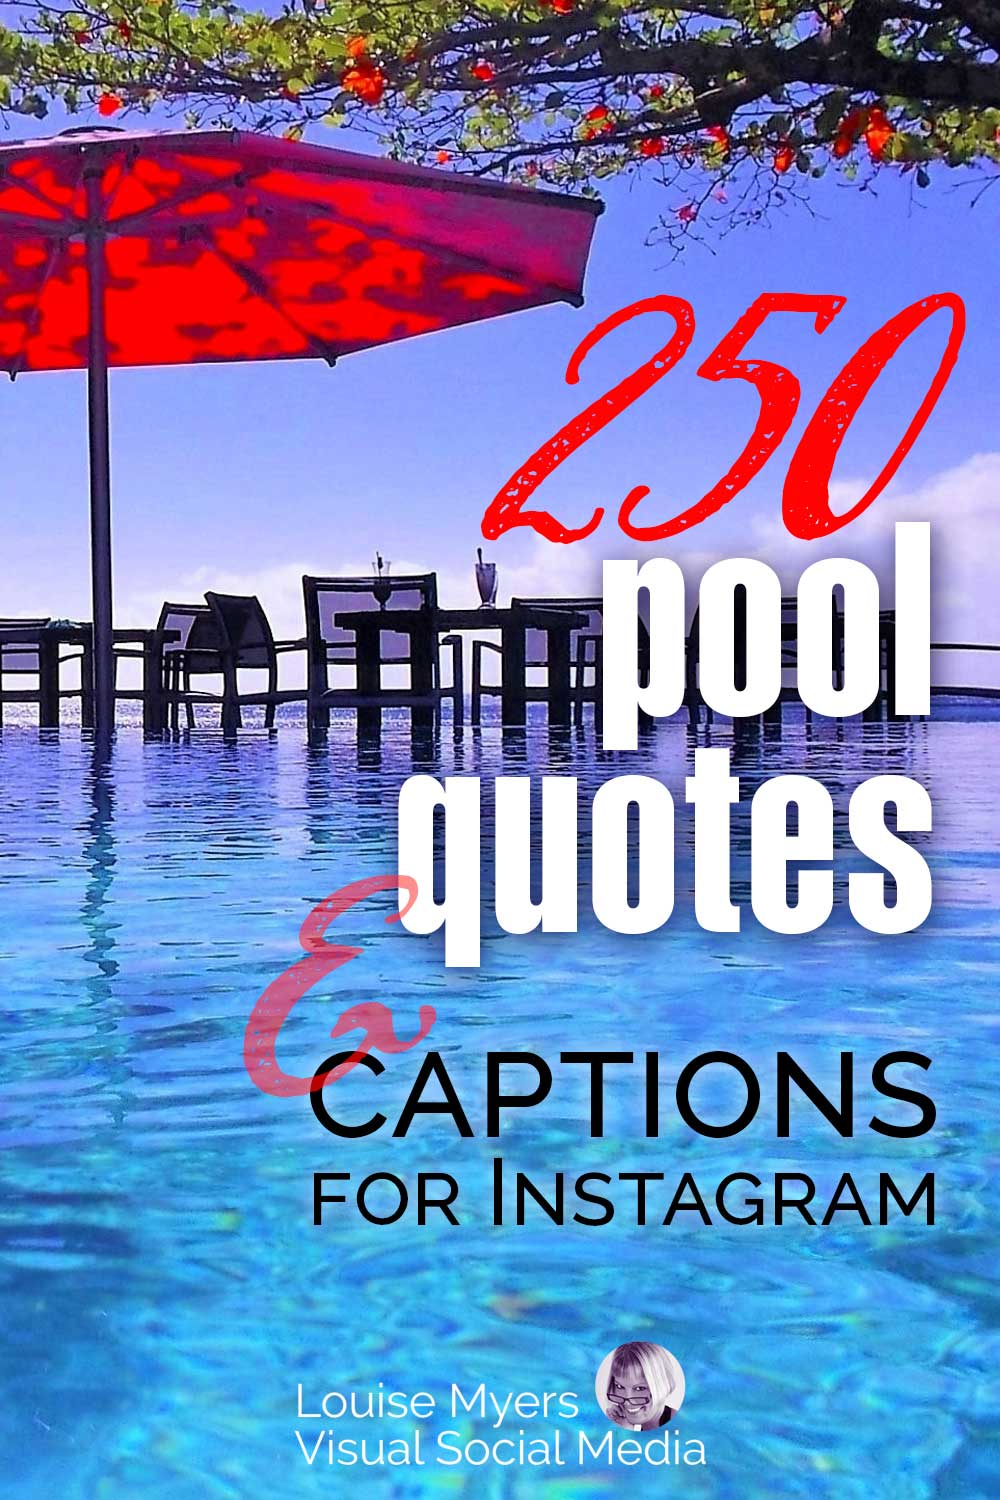 infinity pool with red umbrella says 250 Pool Quotes & Captions for Instagram.